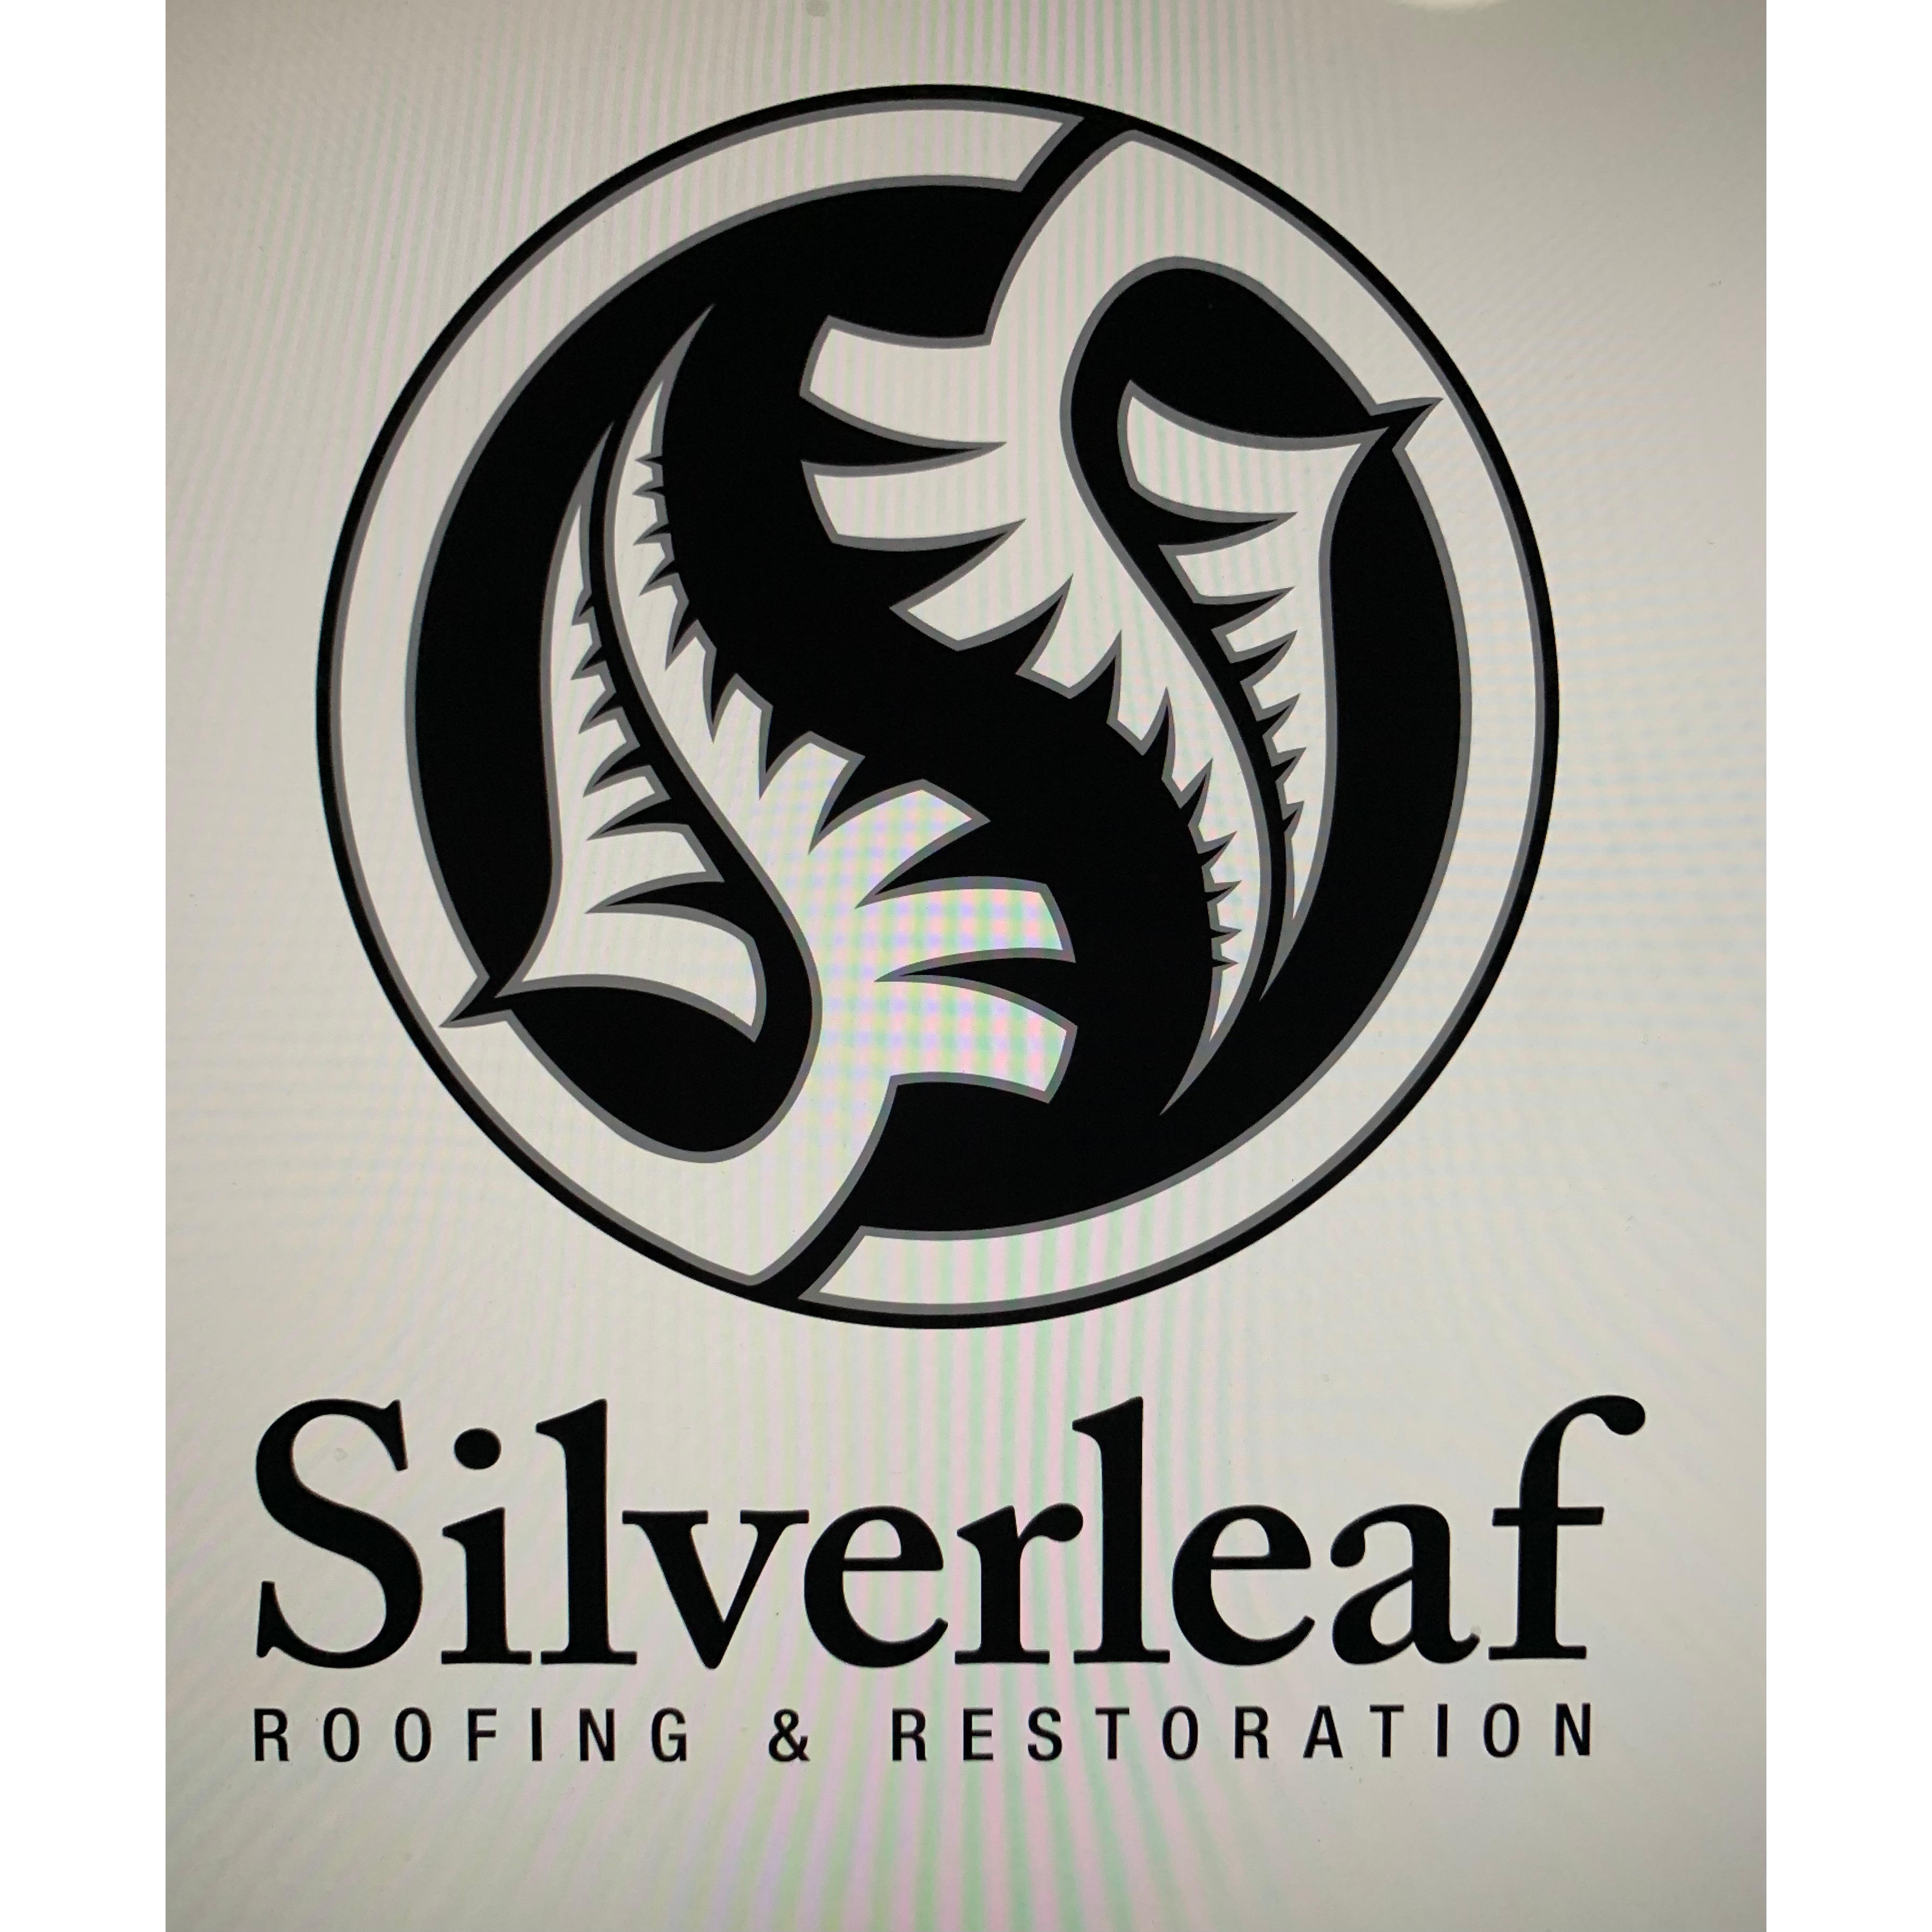 Silverleaf Roofing and Restoration - Emu Heights, NSW - 0413 461 110 | ShowMeLocal.com